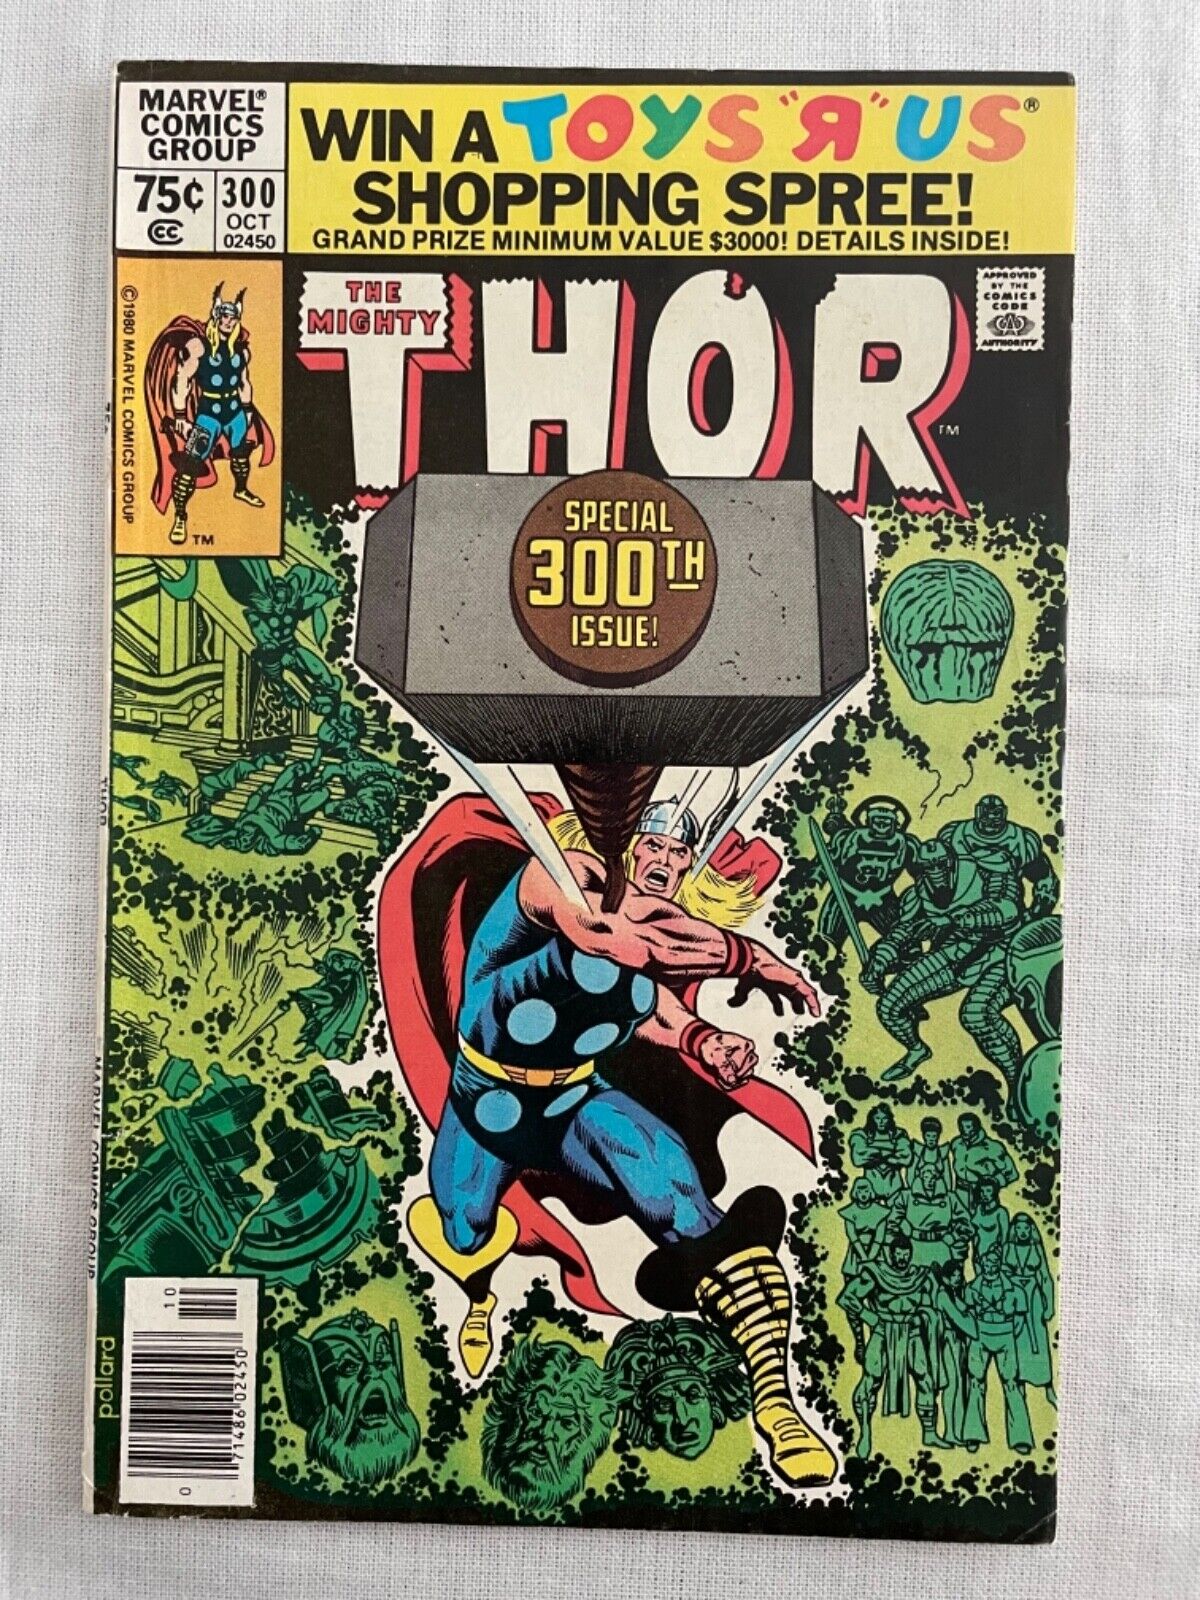 Thor #300 Vol 1 (Marvel, 1980) Key 1st Young Gods/Council of God-Heads, Ungraded